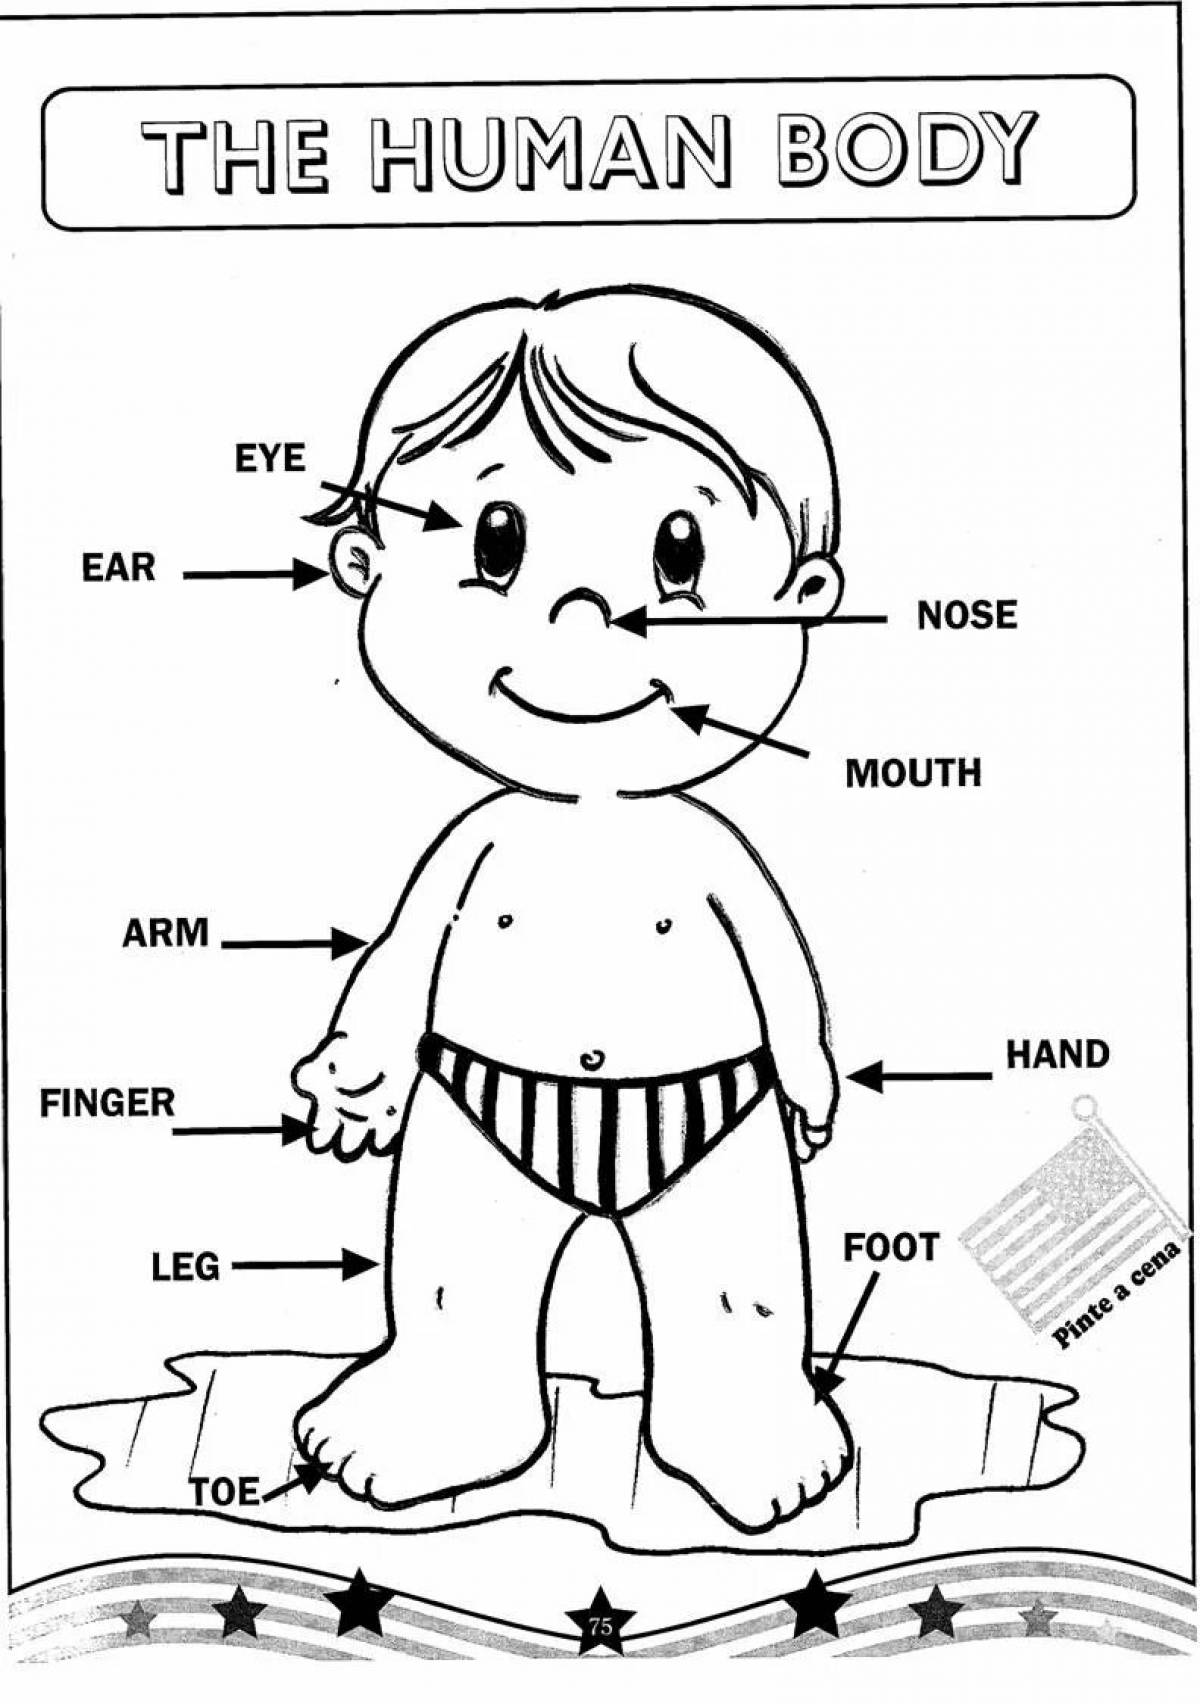 Body parts in english for kids #21